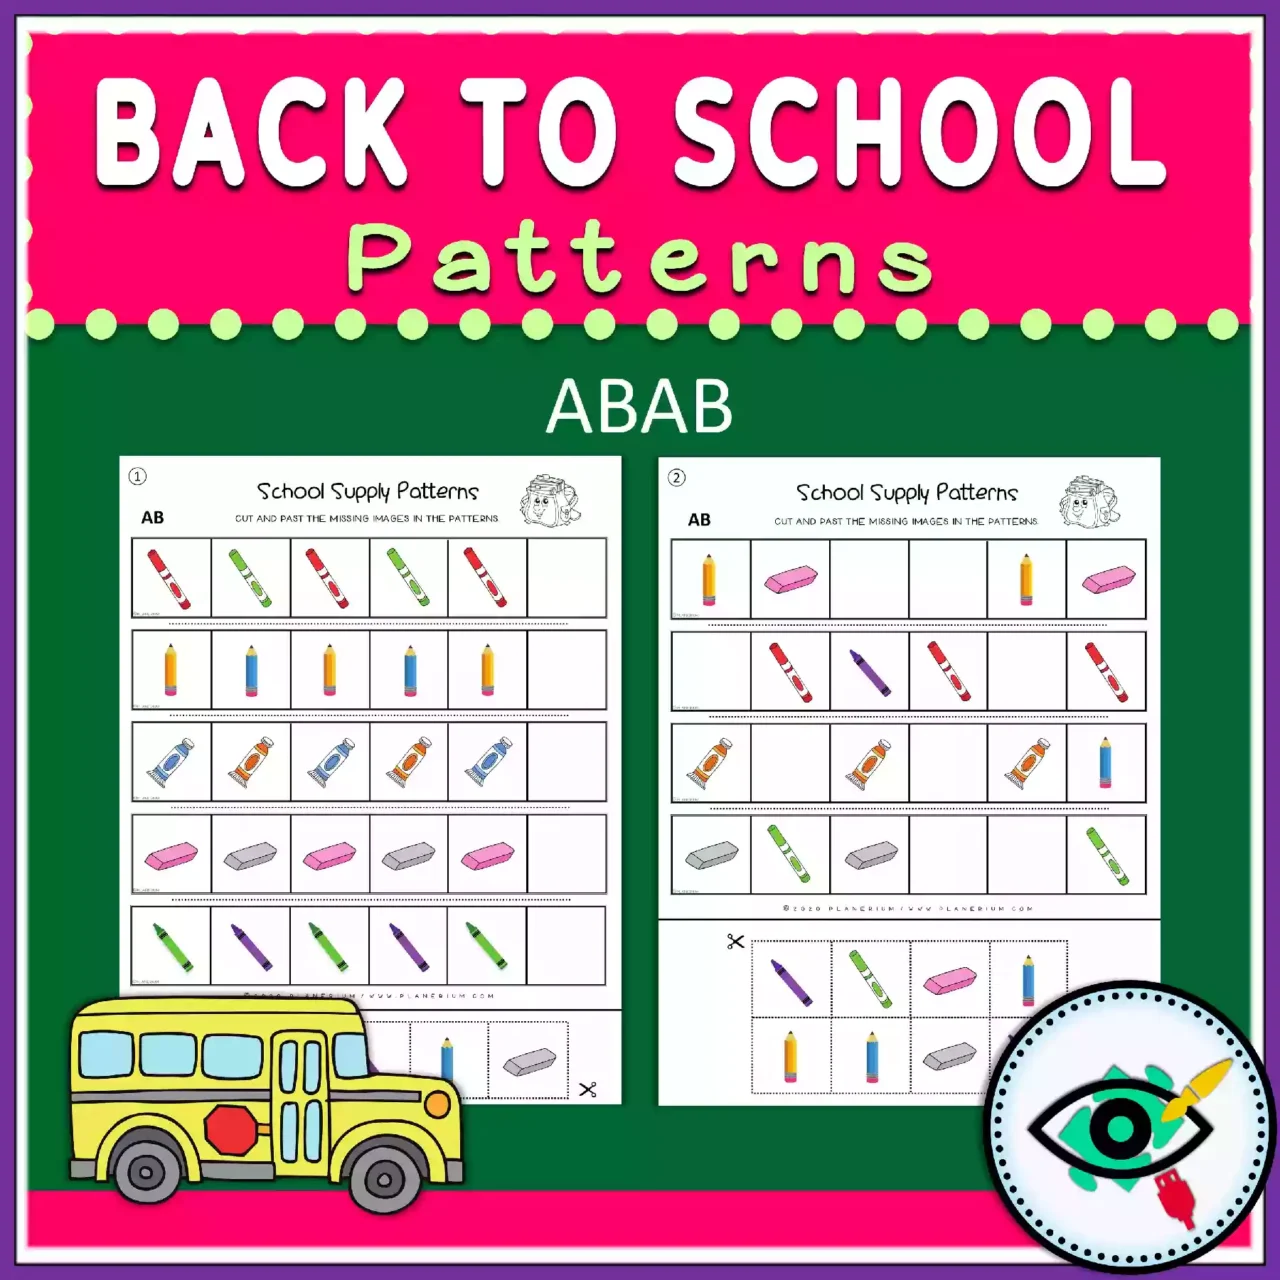 Back to School Patterns - Featured 2